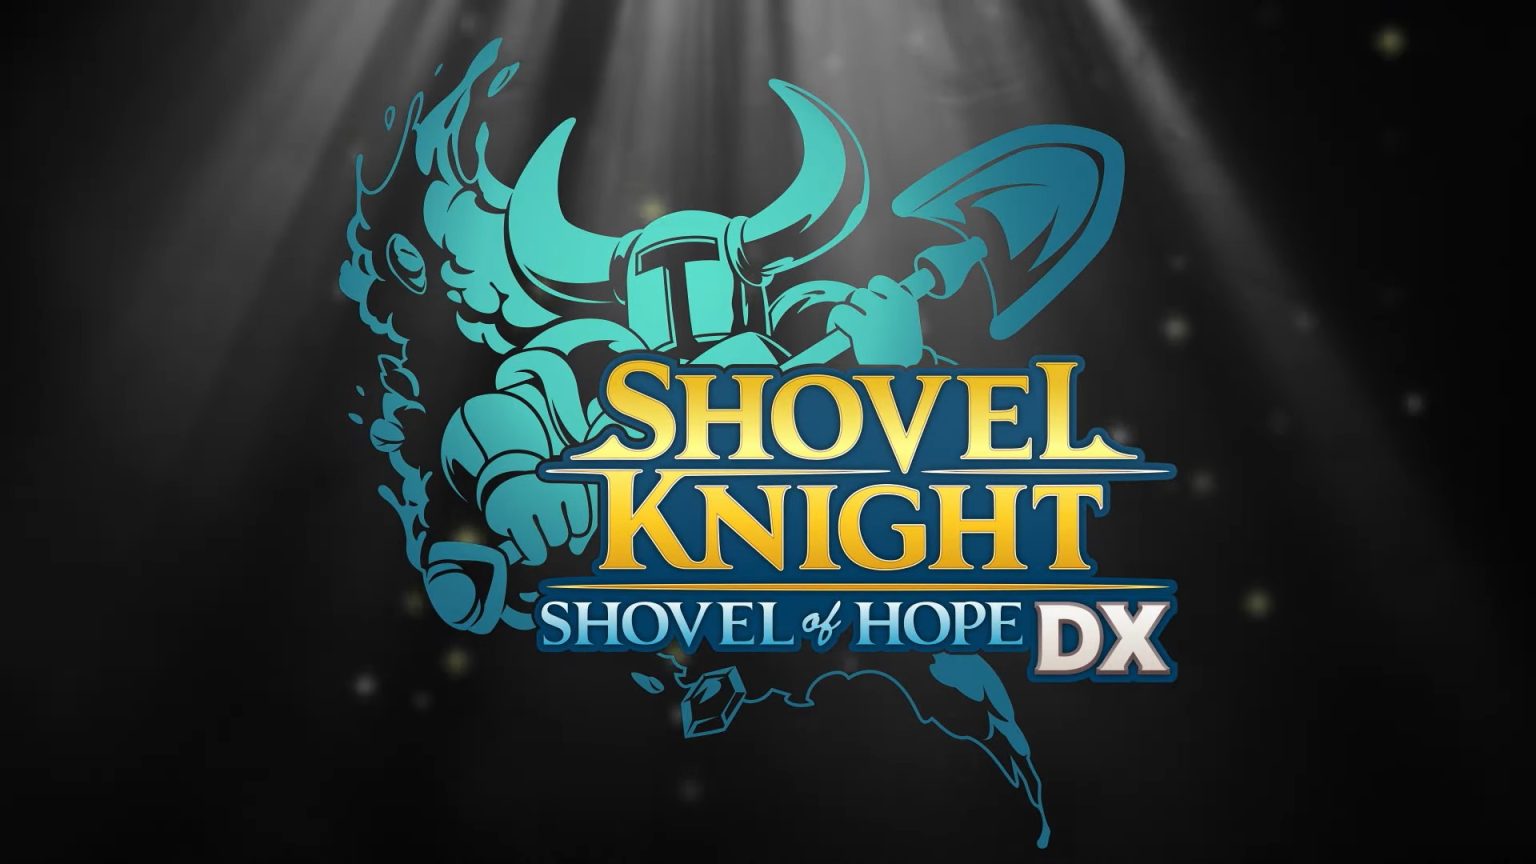 The extended edition of Shovel Knight has been announced: Shovel of Hope - Shovel of Hope DX